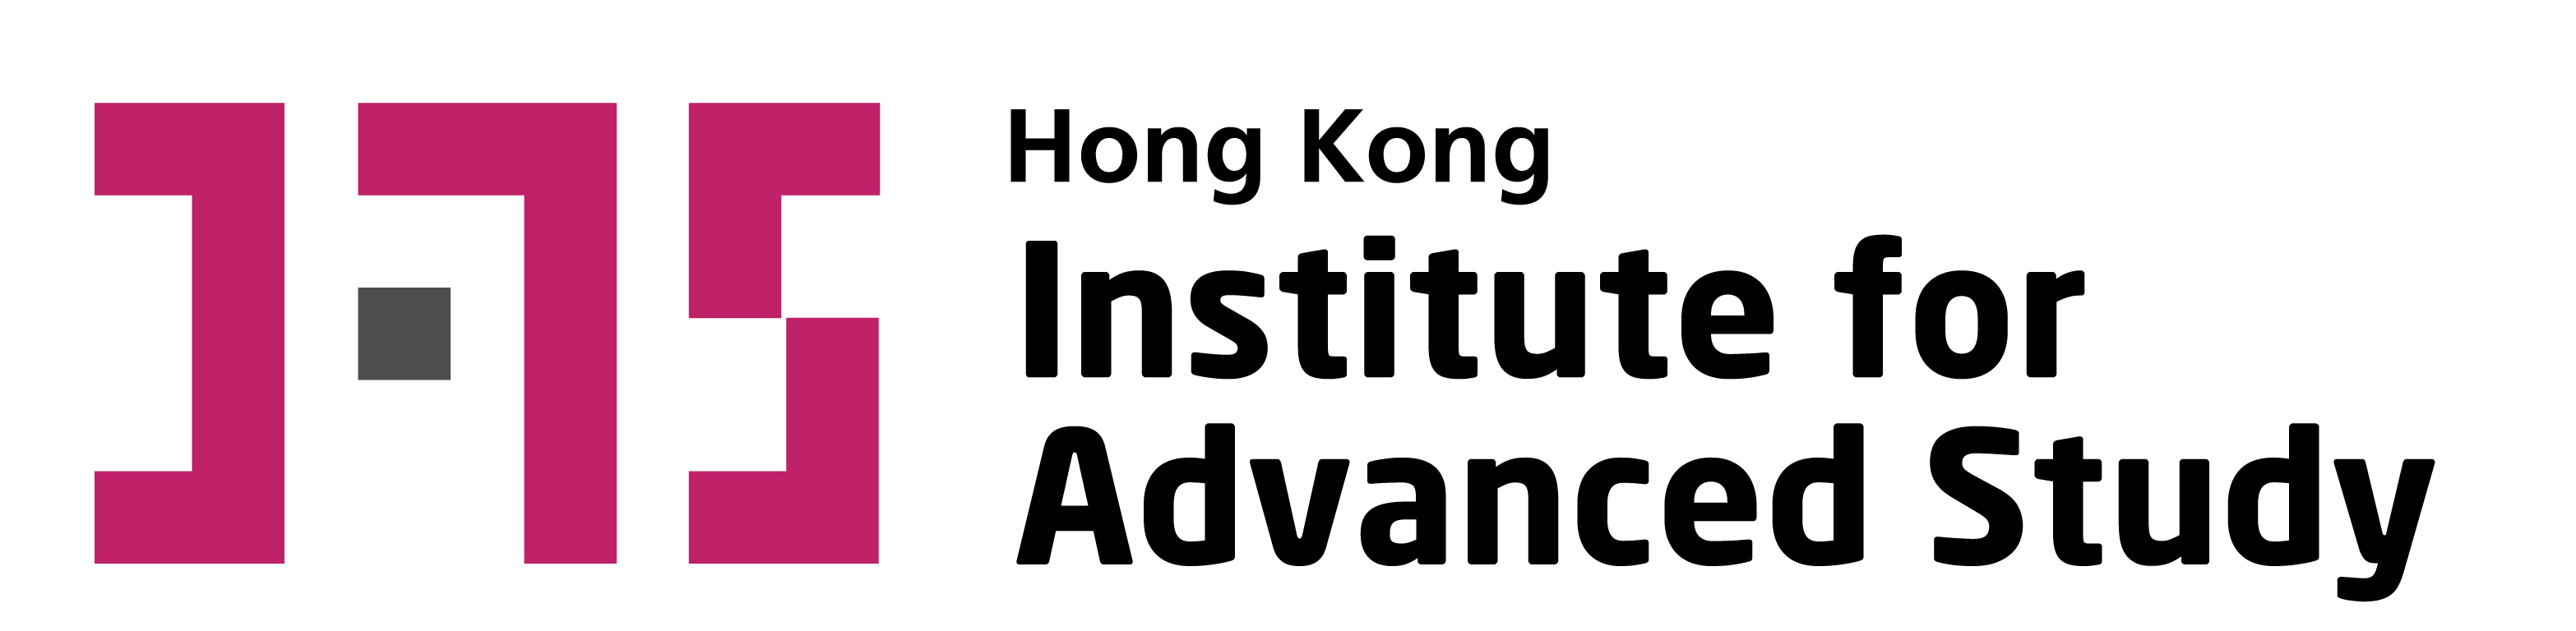 Hong Kong Institute for Advanced Study